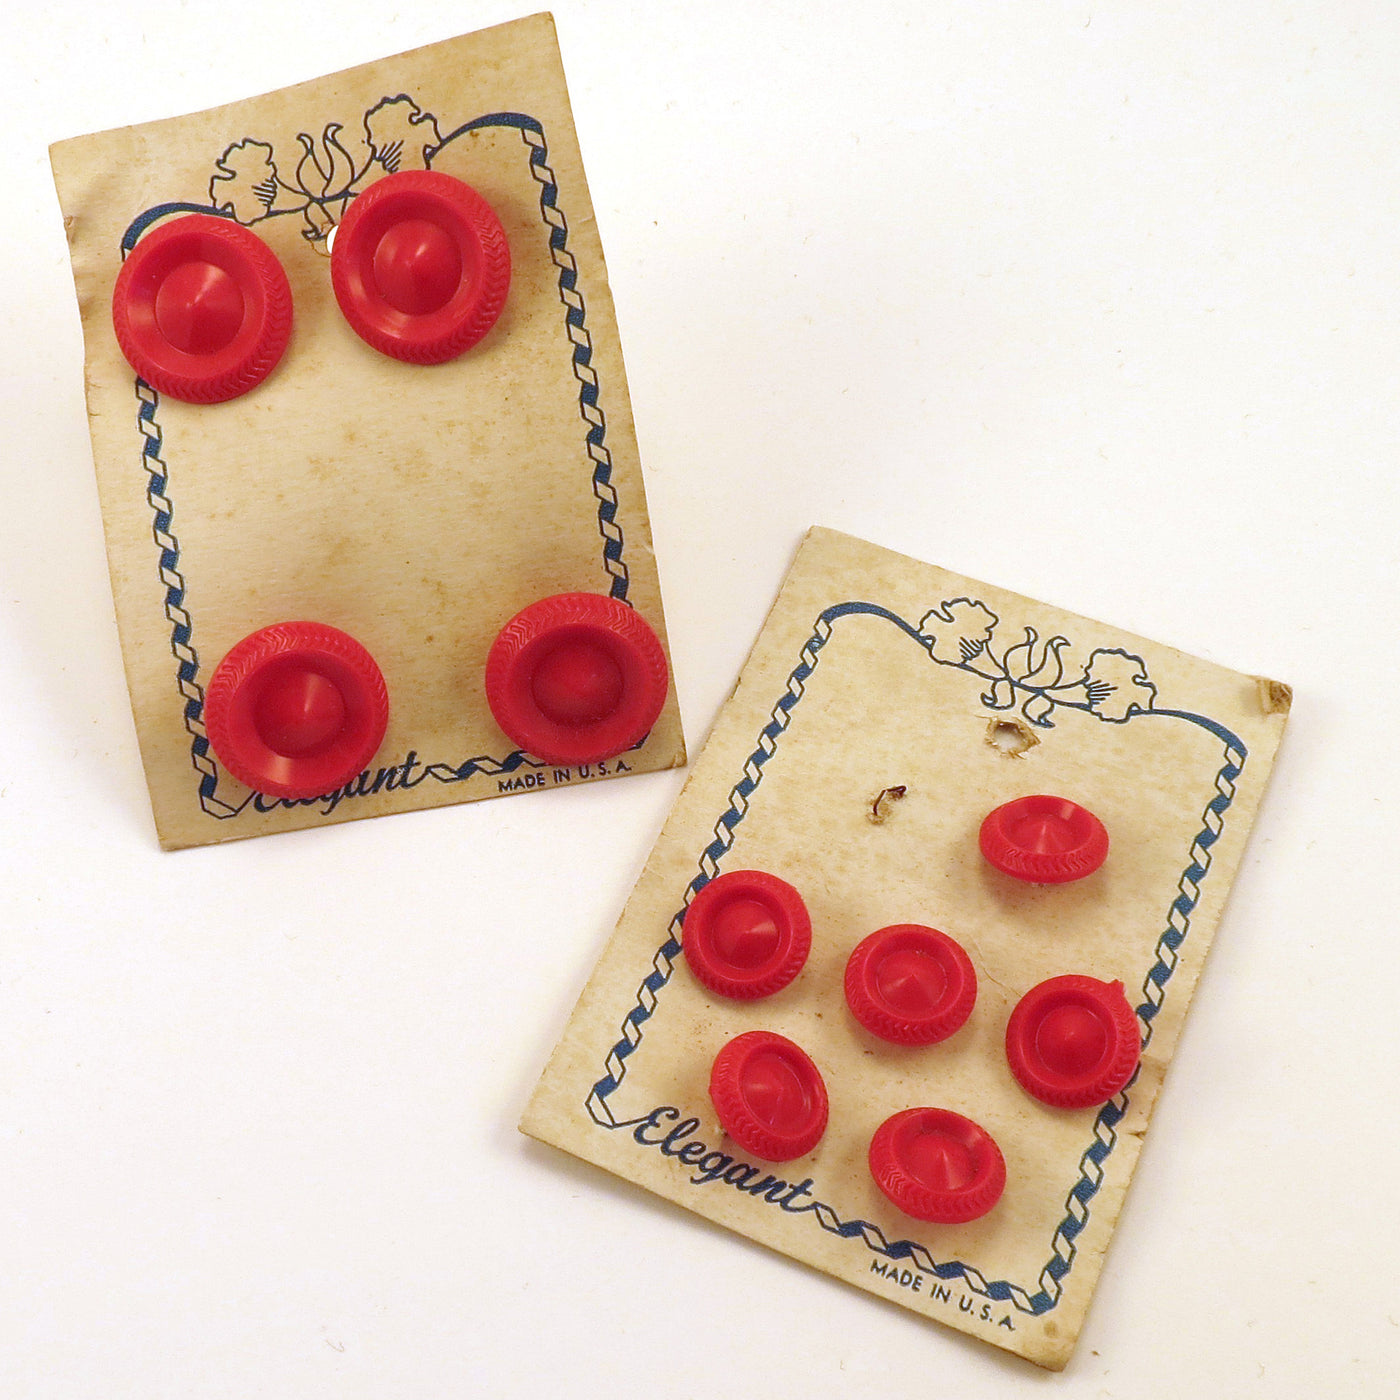 Vintage Radiant Brand Red Buttons New Never Used Red Buttons Set of 3